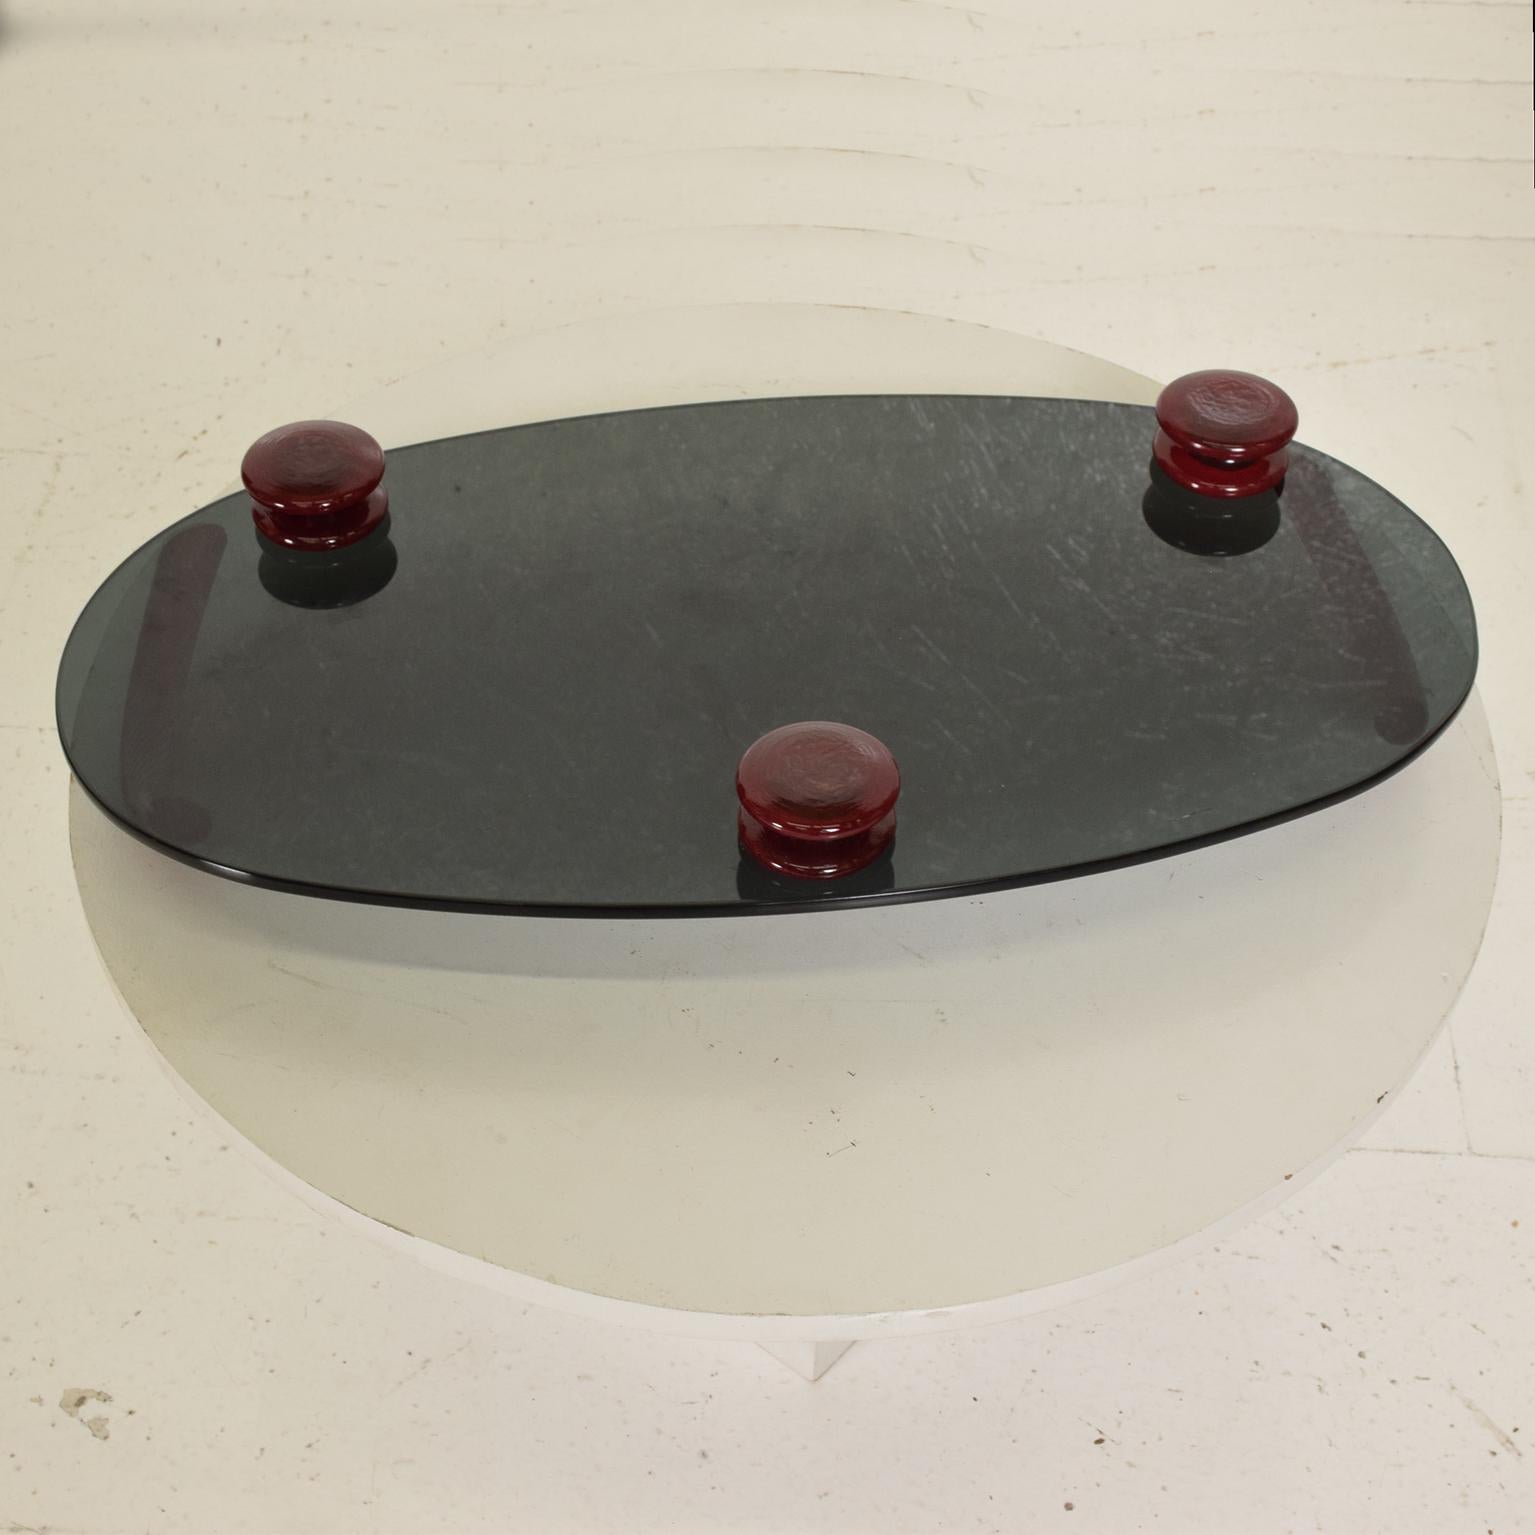 Modernist Oval Serving Tray in Smoke Glass with Red Ruby Glass Handles and Sabot 1